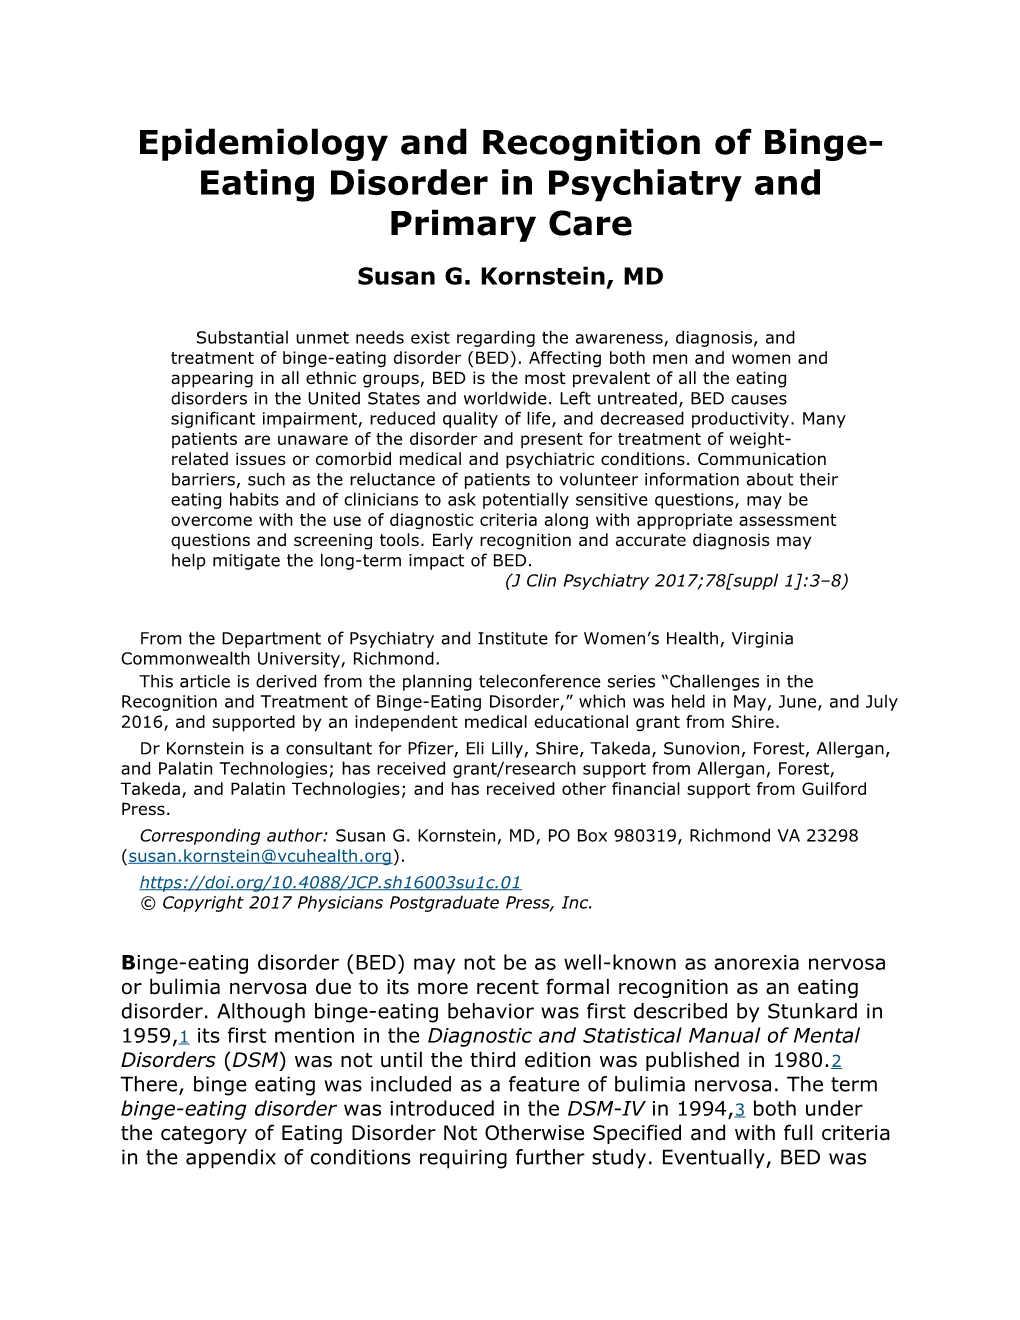 Epidemiology and Recognition of Binge-Eating Disorder in Psychiatry and Primary Care